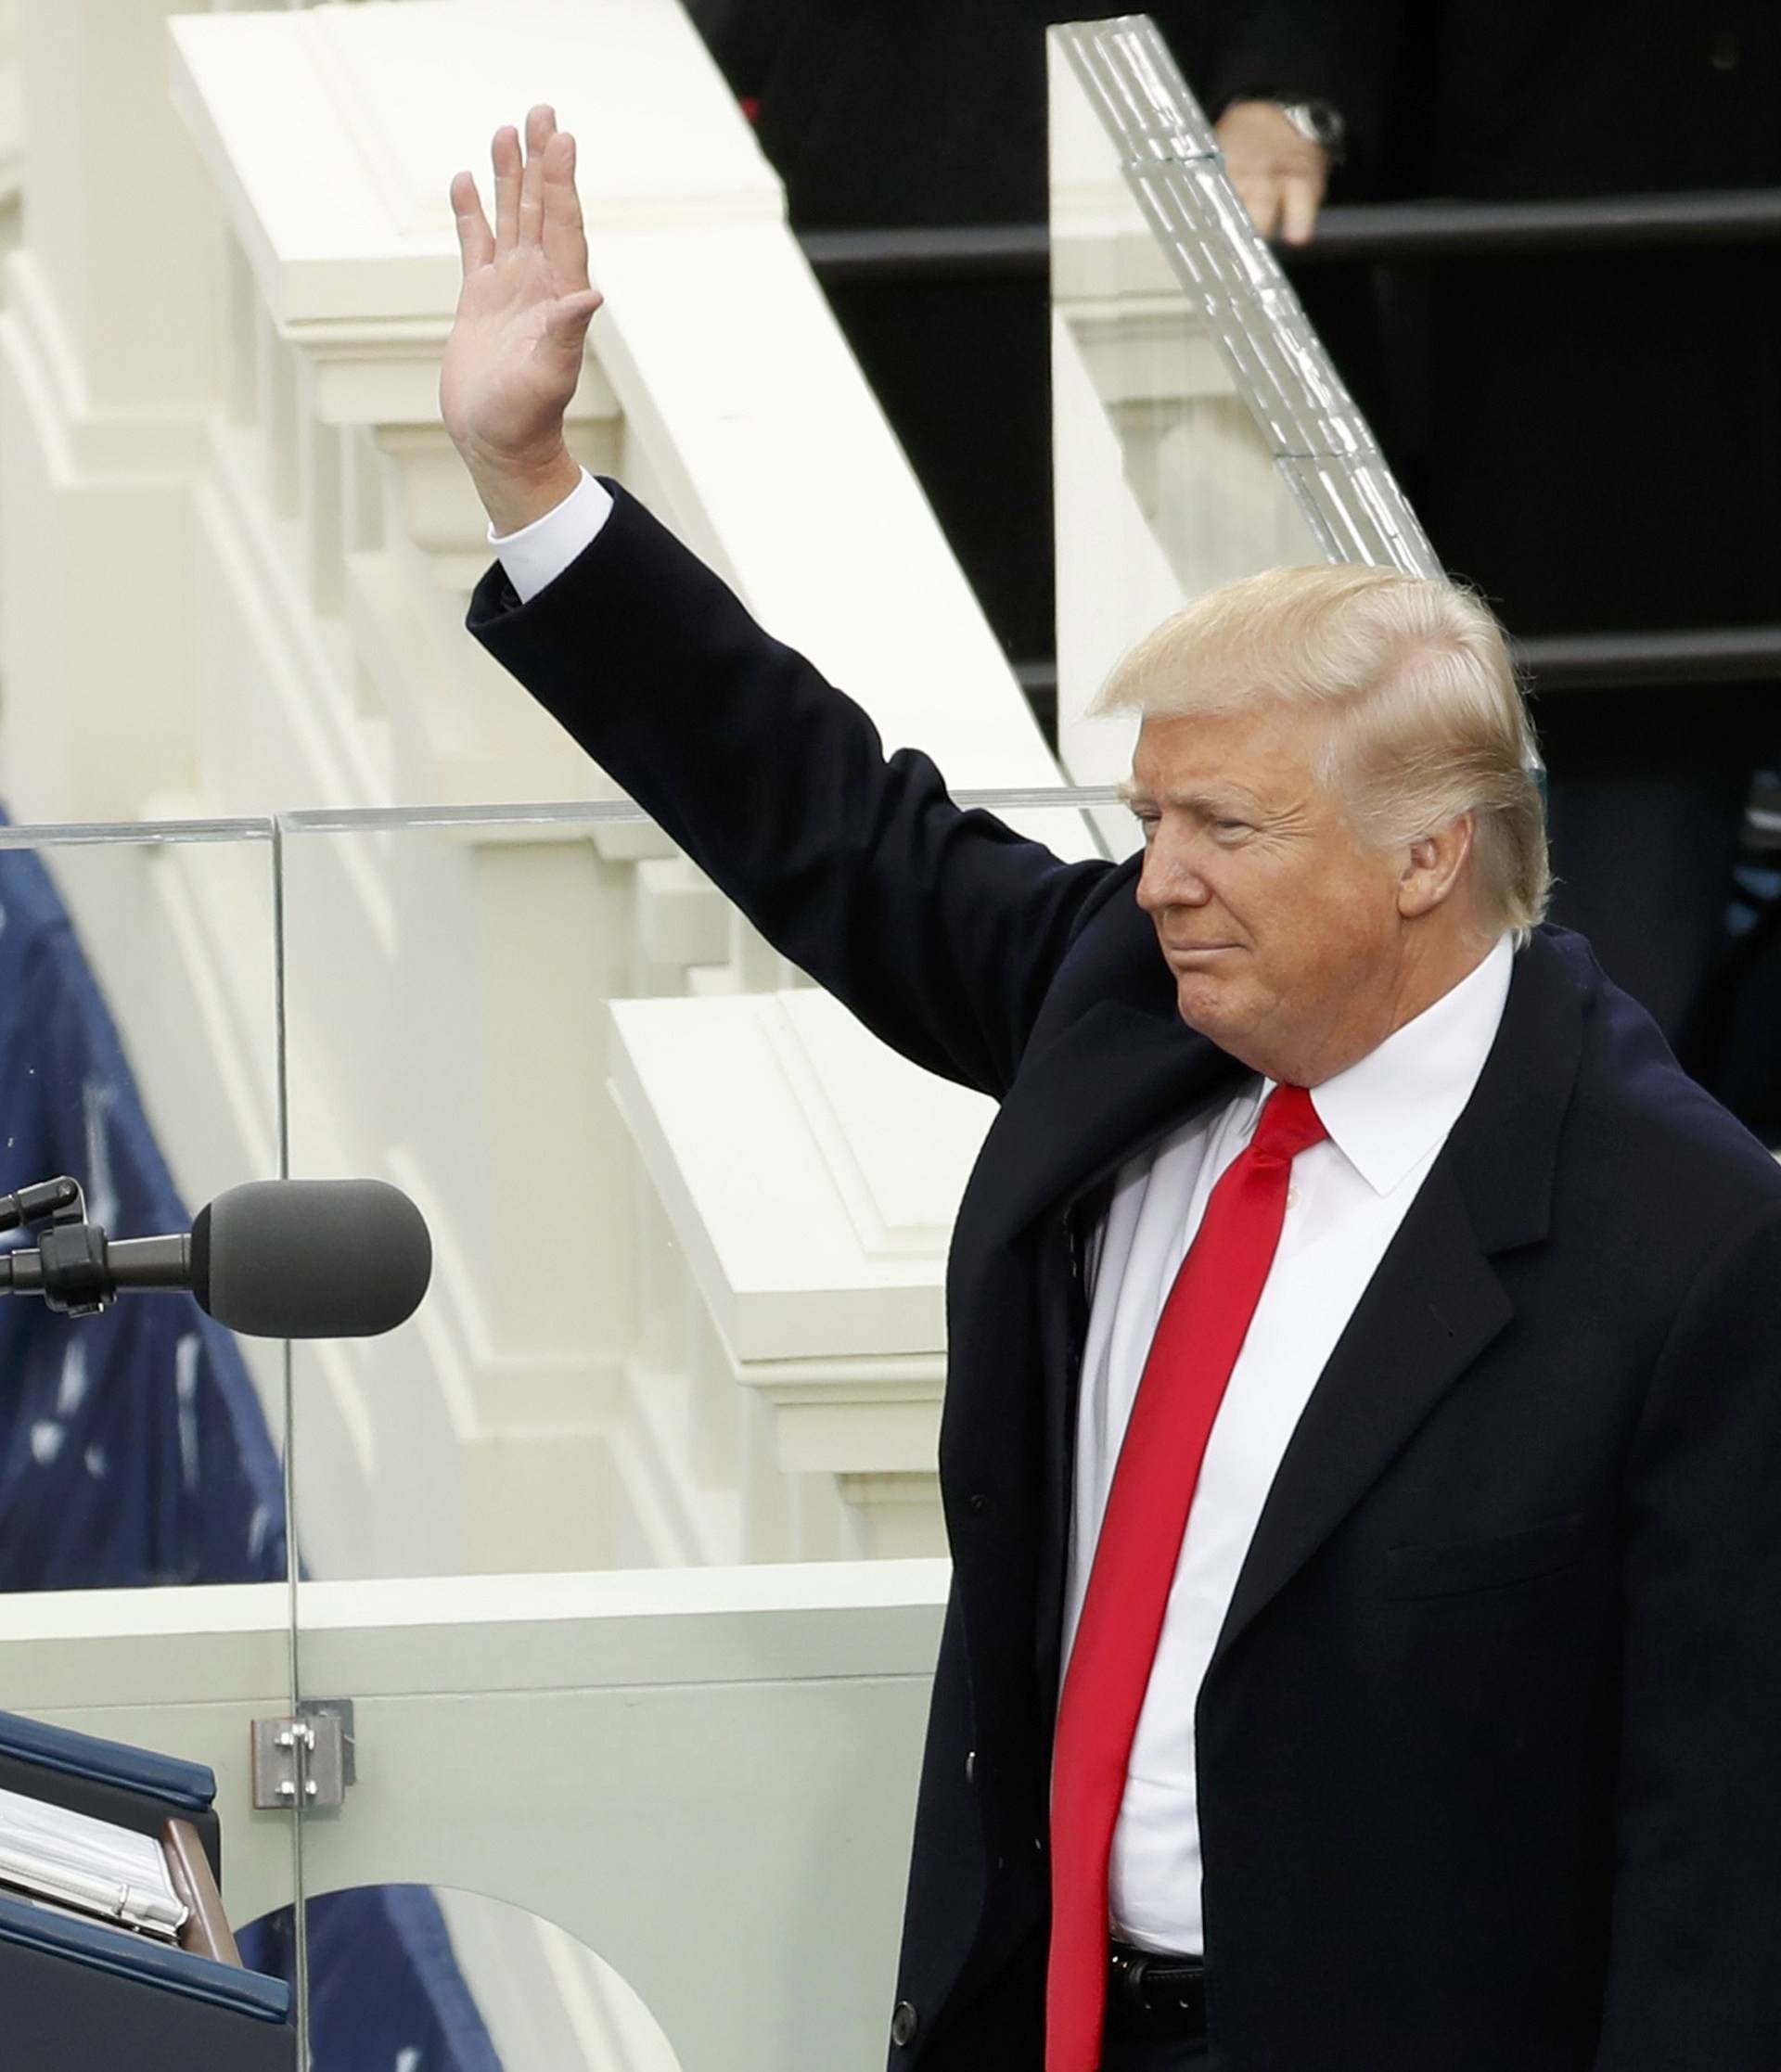 Donald Trump and his wife Melania wave to crowd after he was sworn in as the 45th president of the United States in Washington